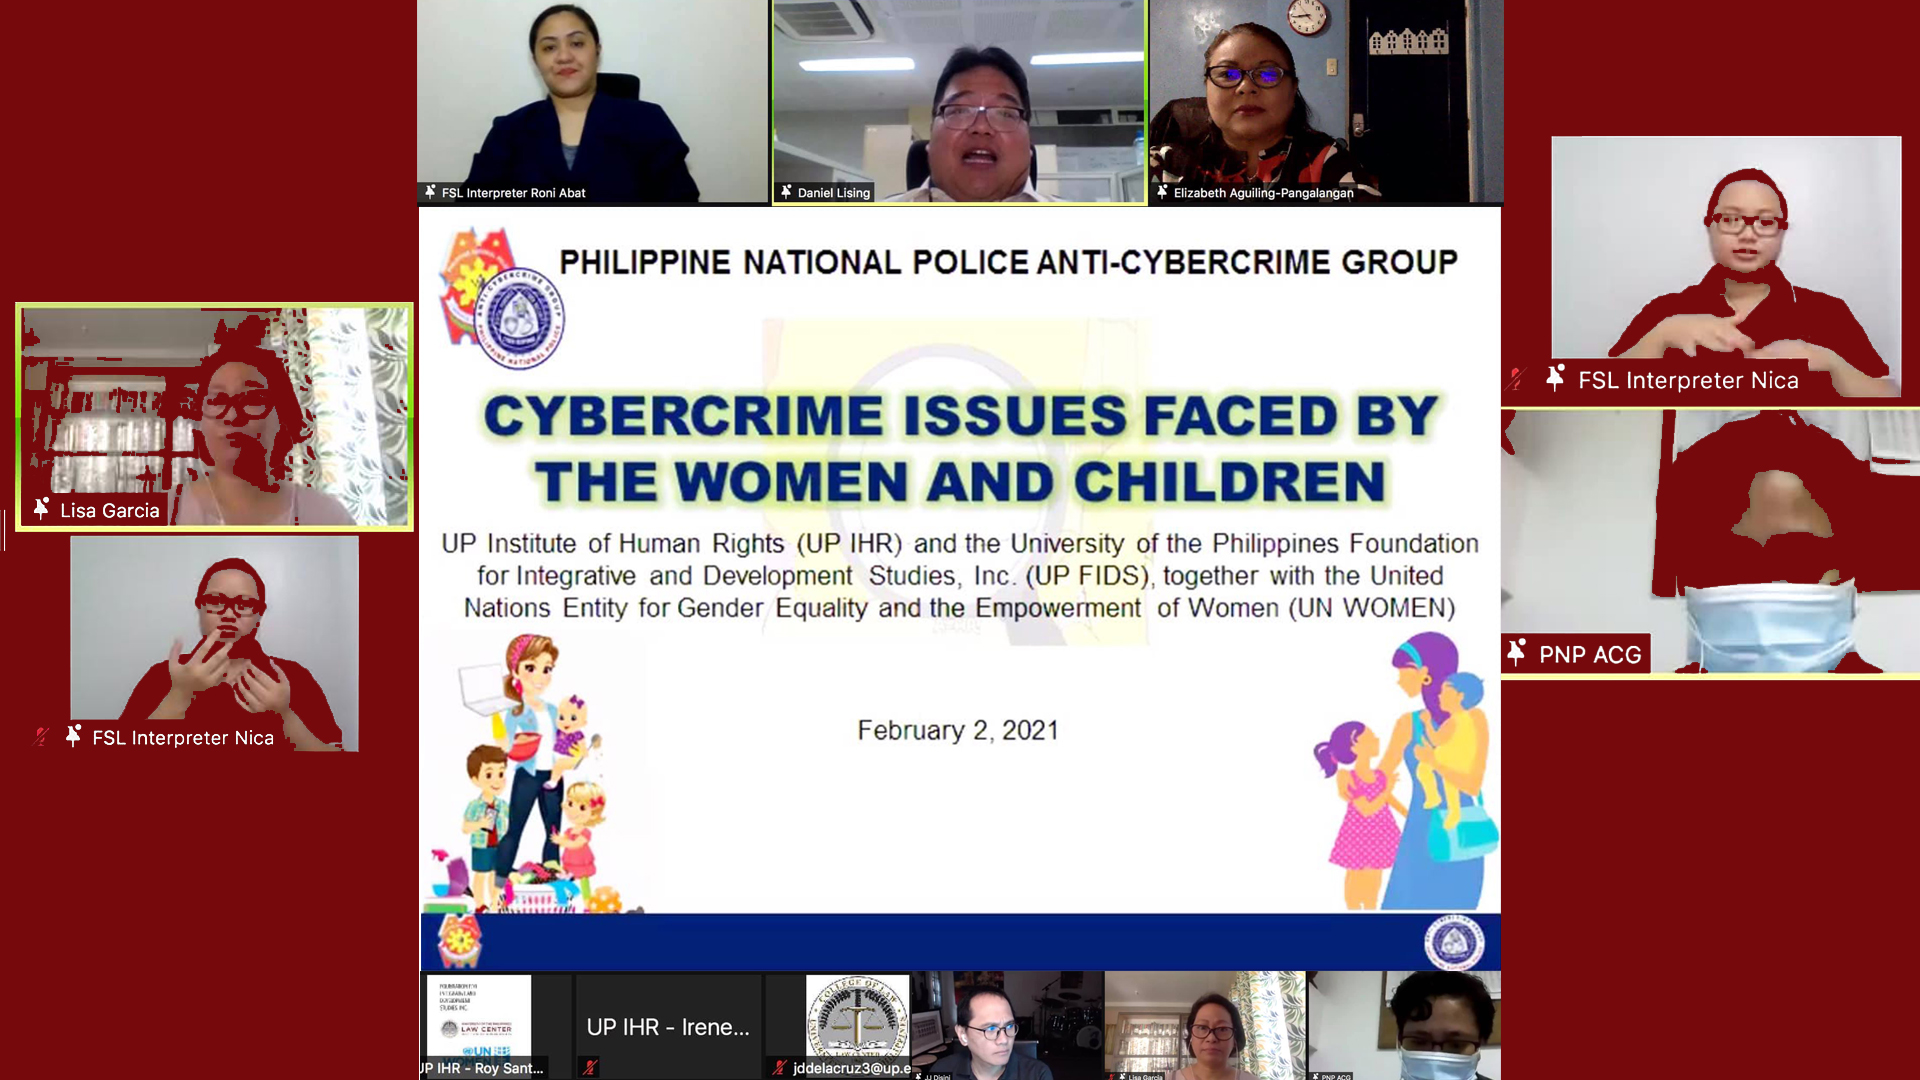 Prevalence of Online Gender-based Violence in the Philippines